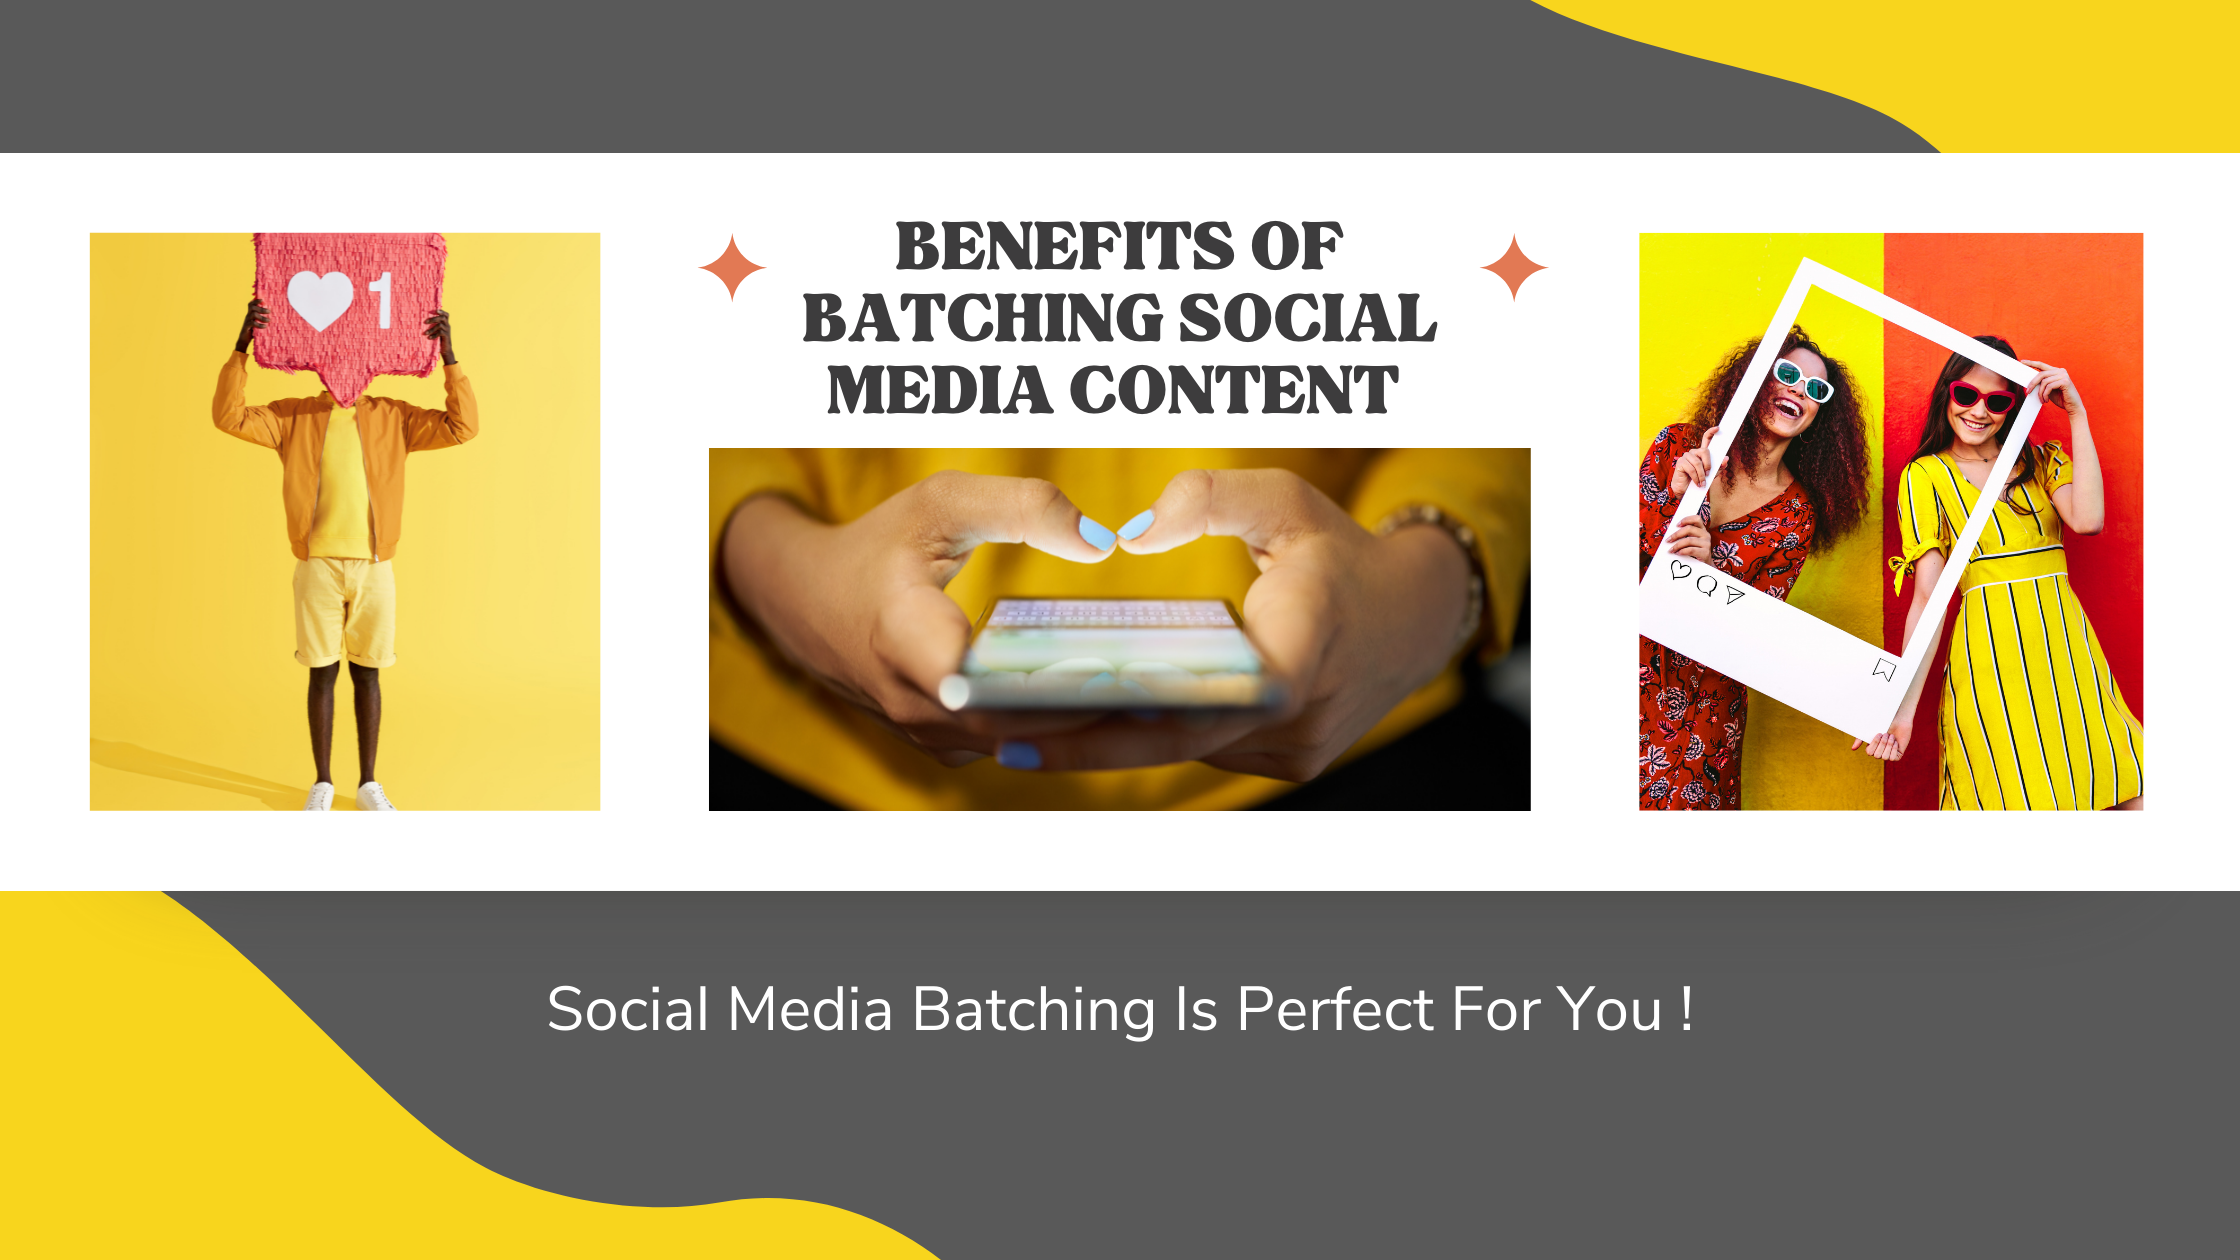 Benefits of batching social media content image